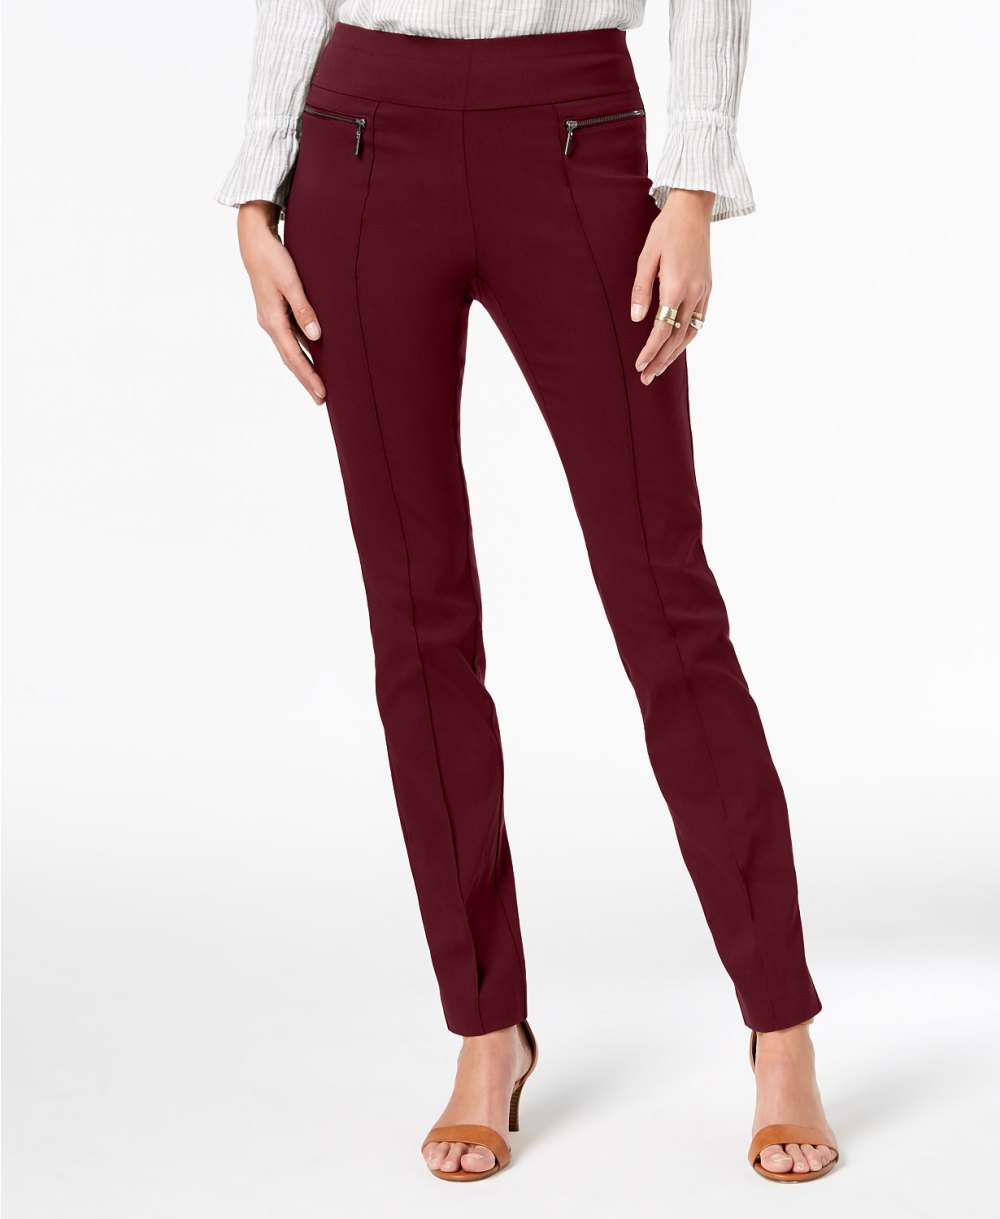 style & co pull on skinny pants